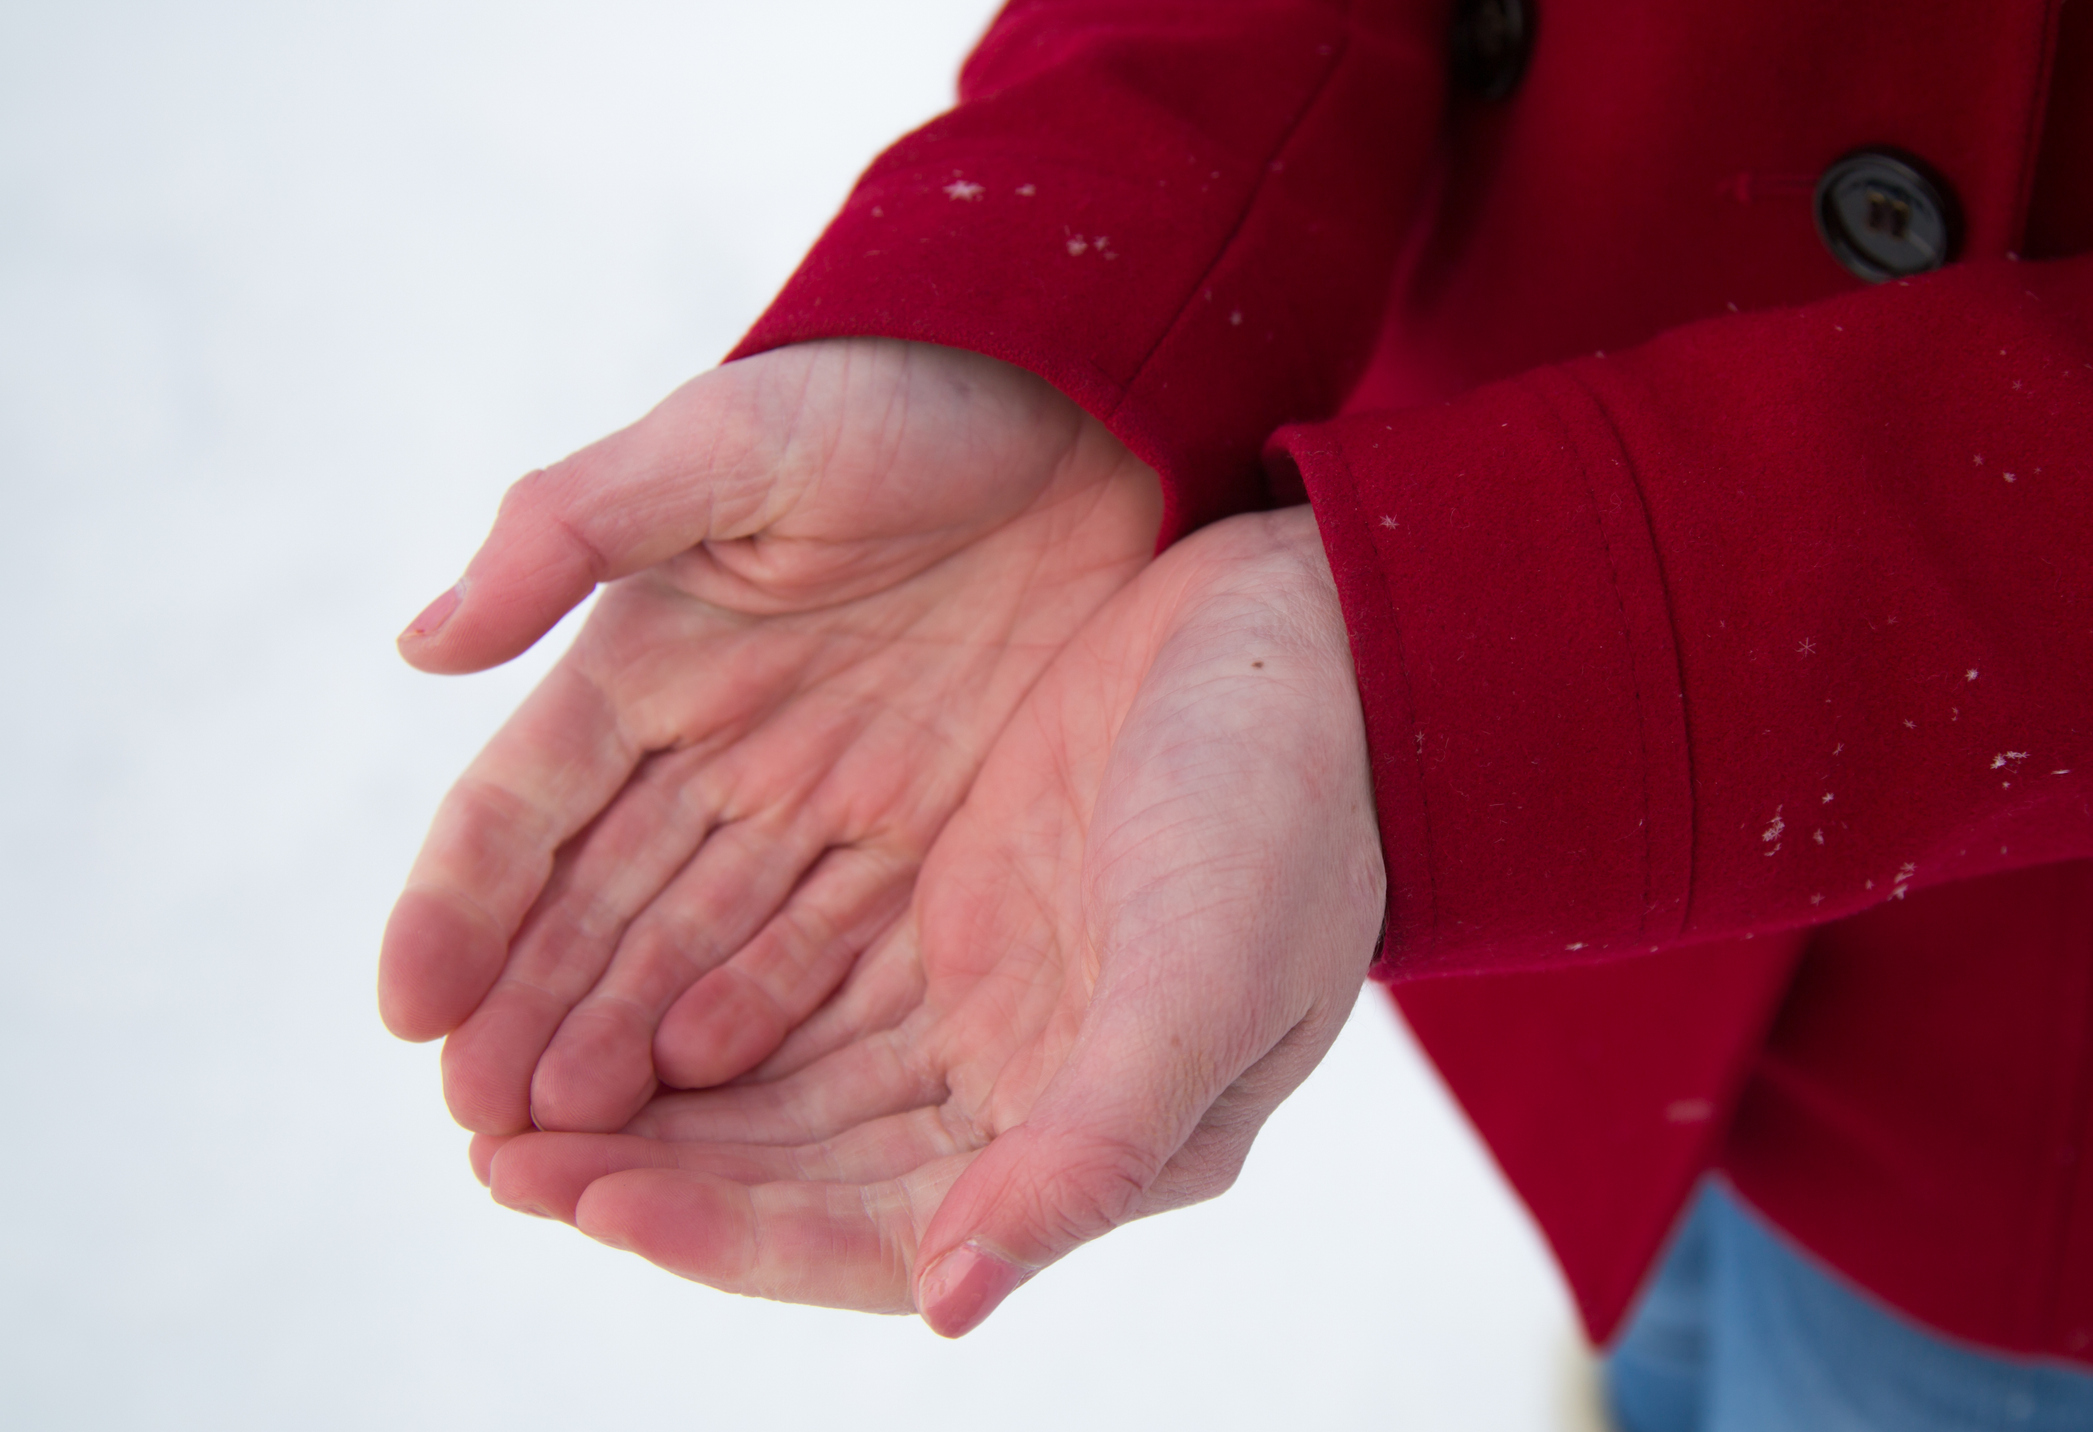 Raynaud's Phenomenon turning a person's hands different colors in the cold